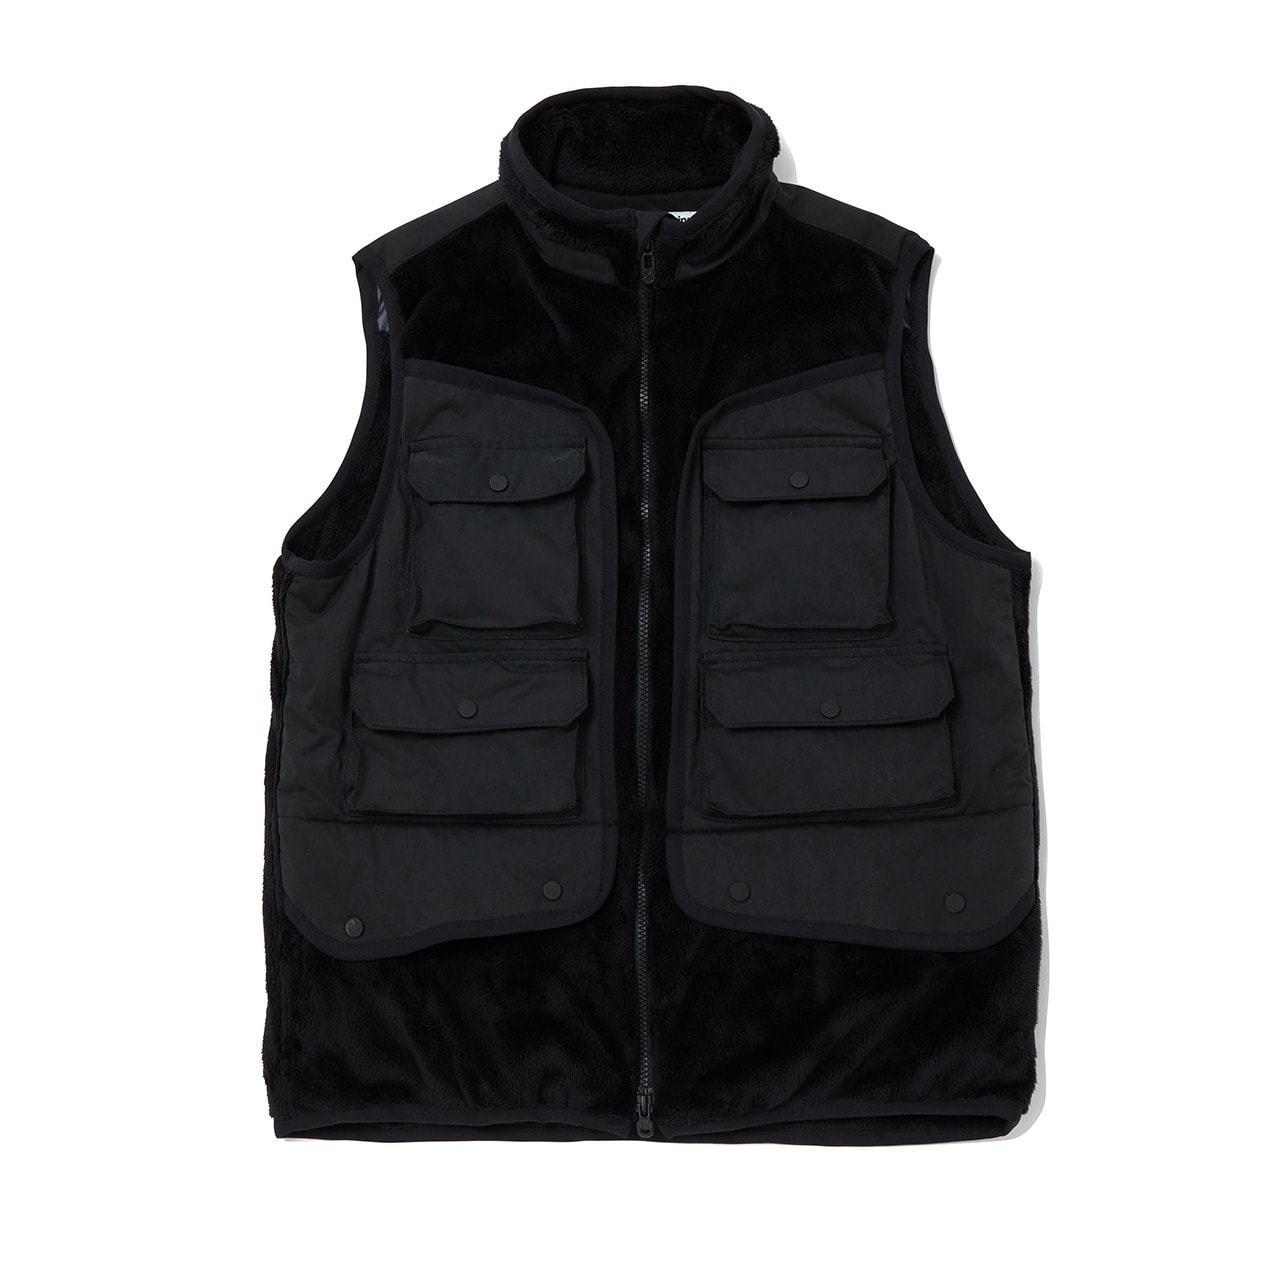 WHITE MOUNTAINEERING FW20 Pendleton, Patchwork Fleece capsule collection jacket gore tex vest jacket bag neck warmer accessories collaboration fall winter 2020 collection japan